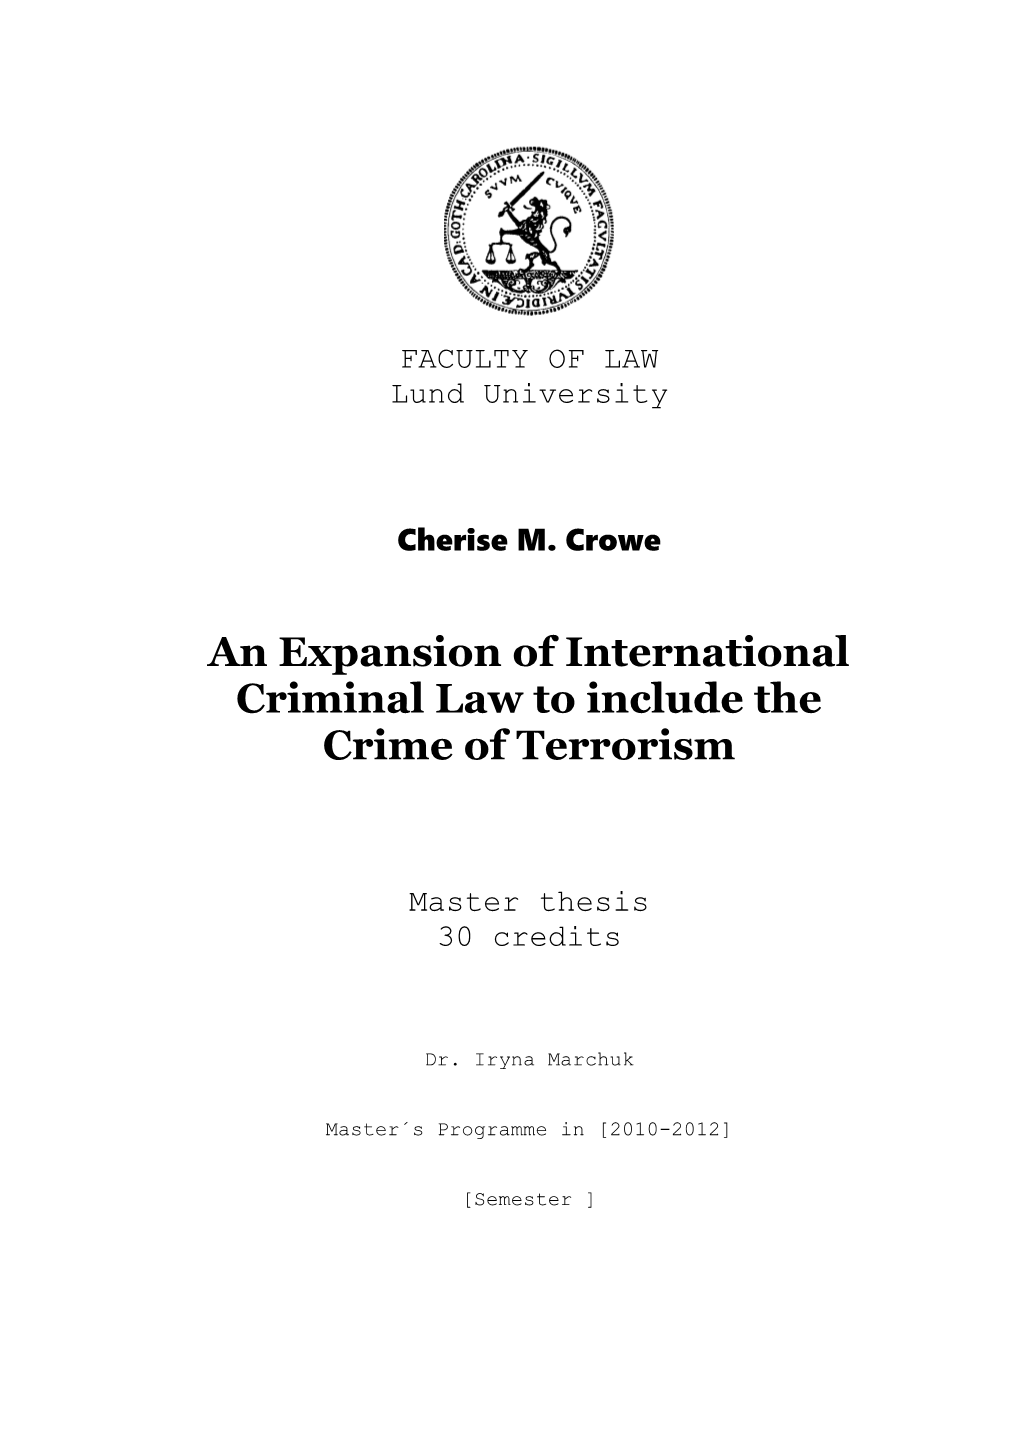 An Expansion of International Criminal Law to Include the Crime of Terrorism